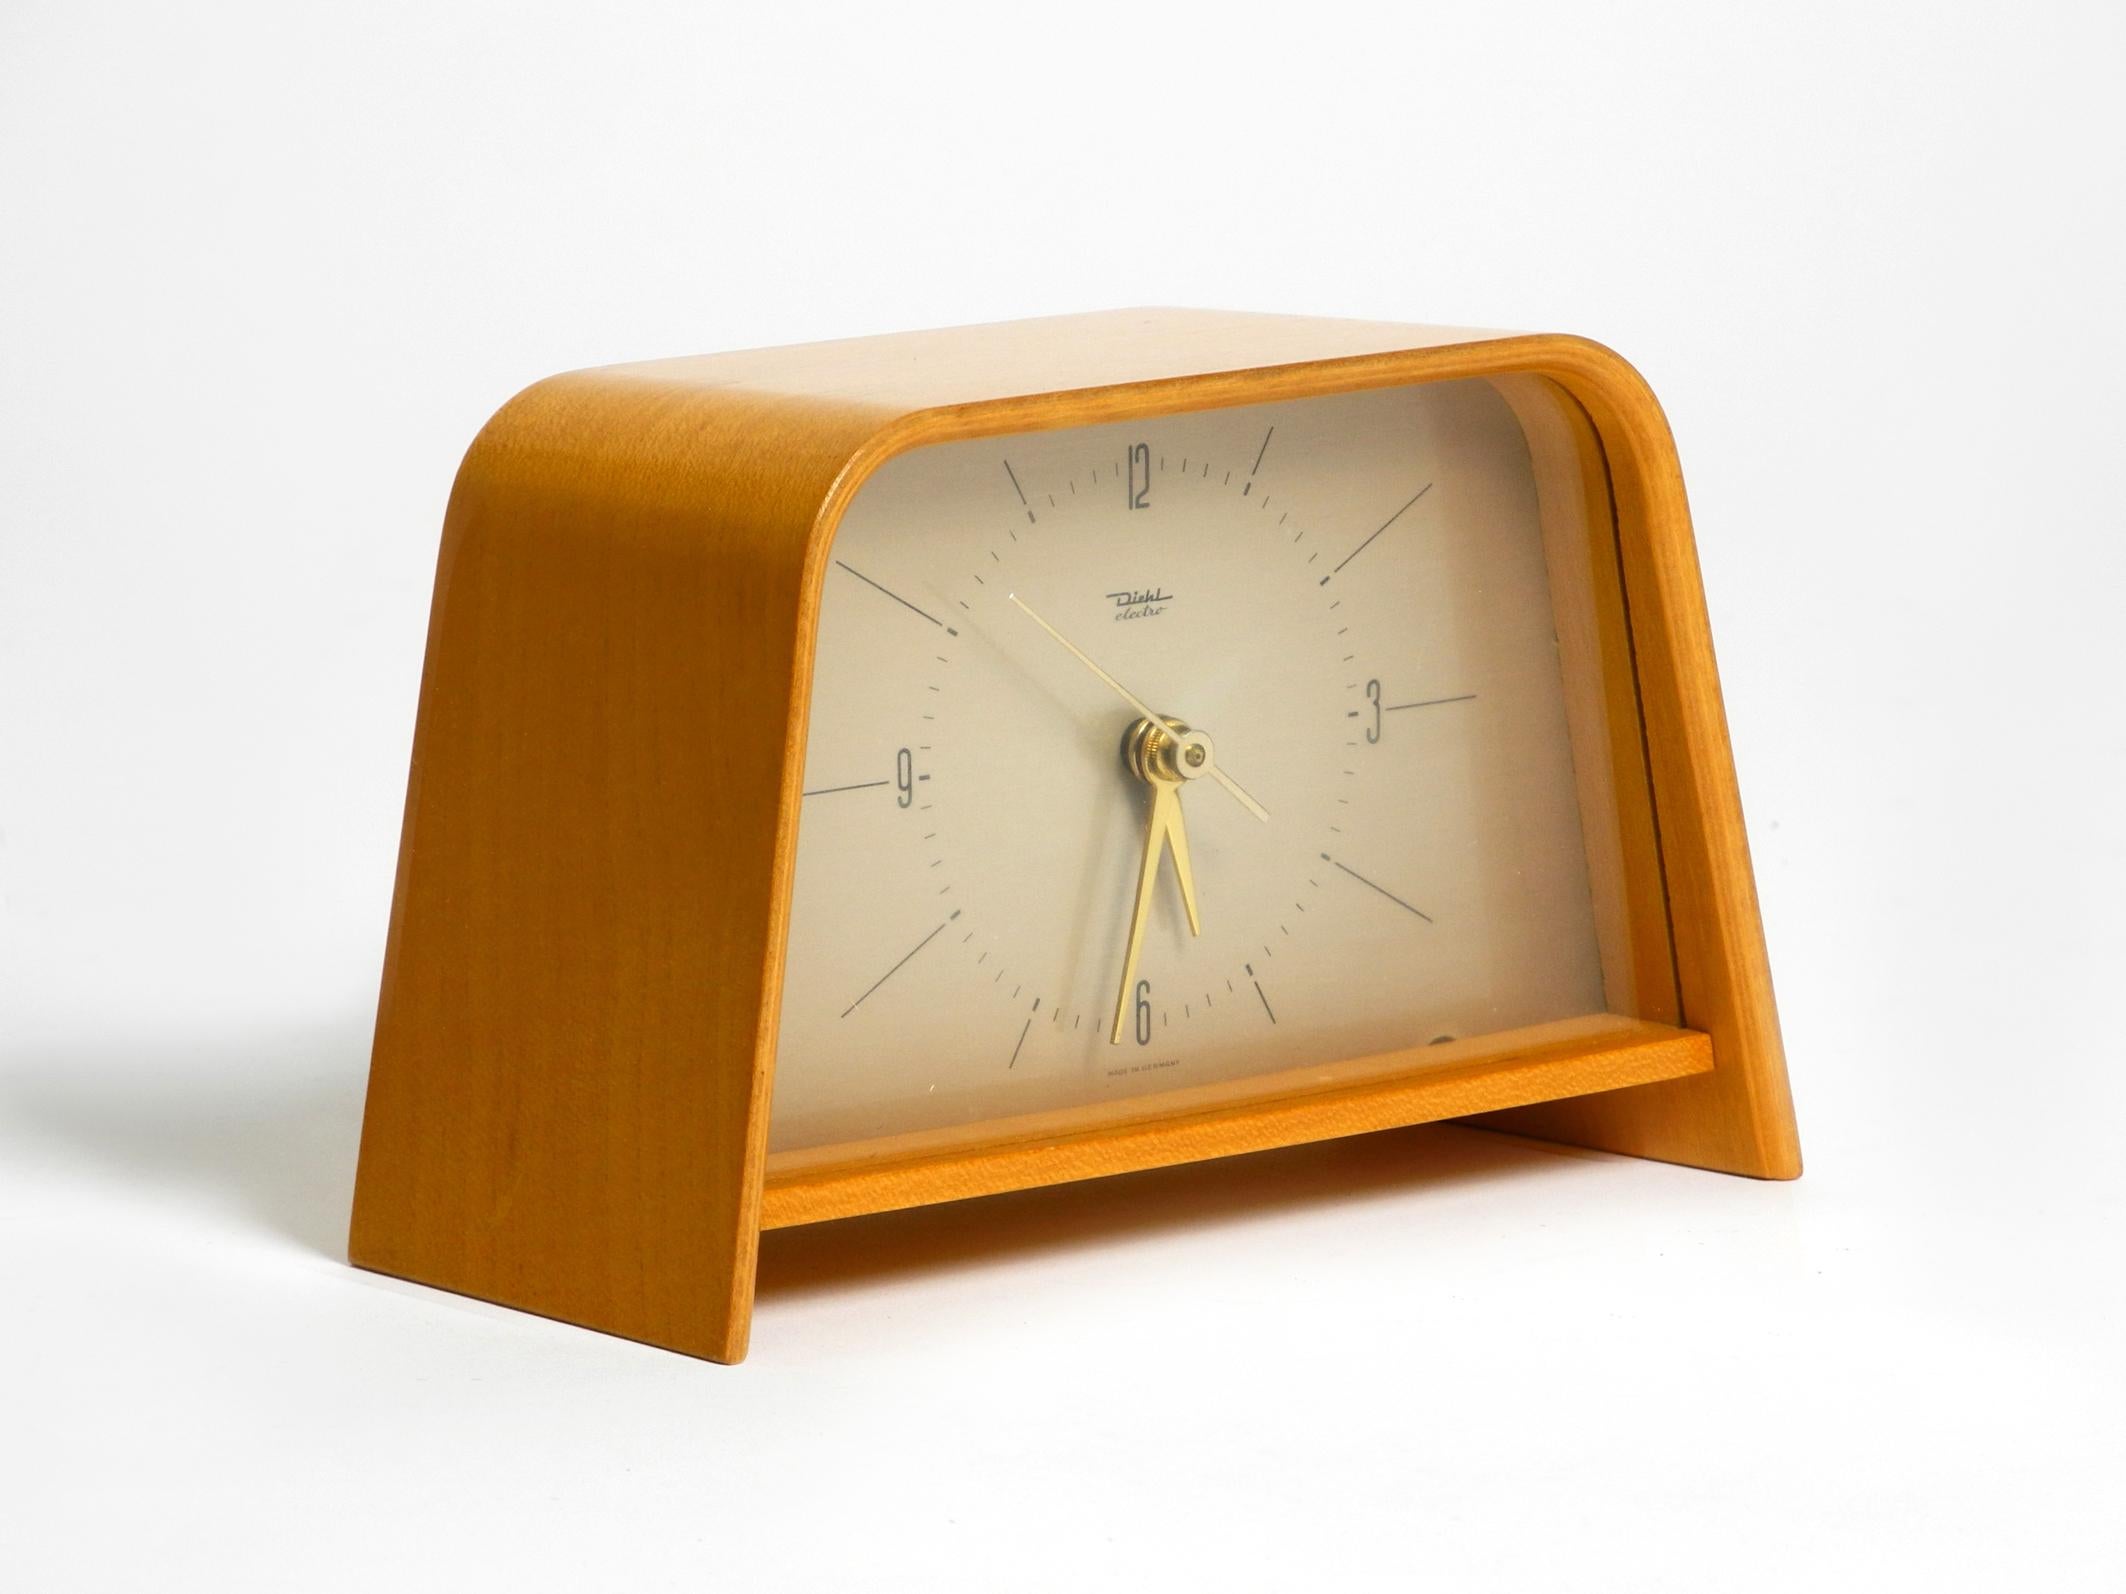 Beautiful, very rare original 1950s Diehl table clock with curved teak plywood casing. Very good vintage condition. Hardly any signs of use can be seen. Made in Germany.
Battery operated with original electromechanical Diehl movement.
The battery